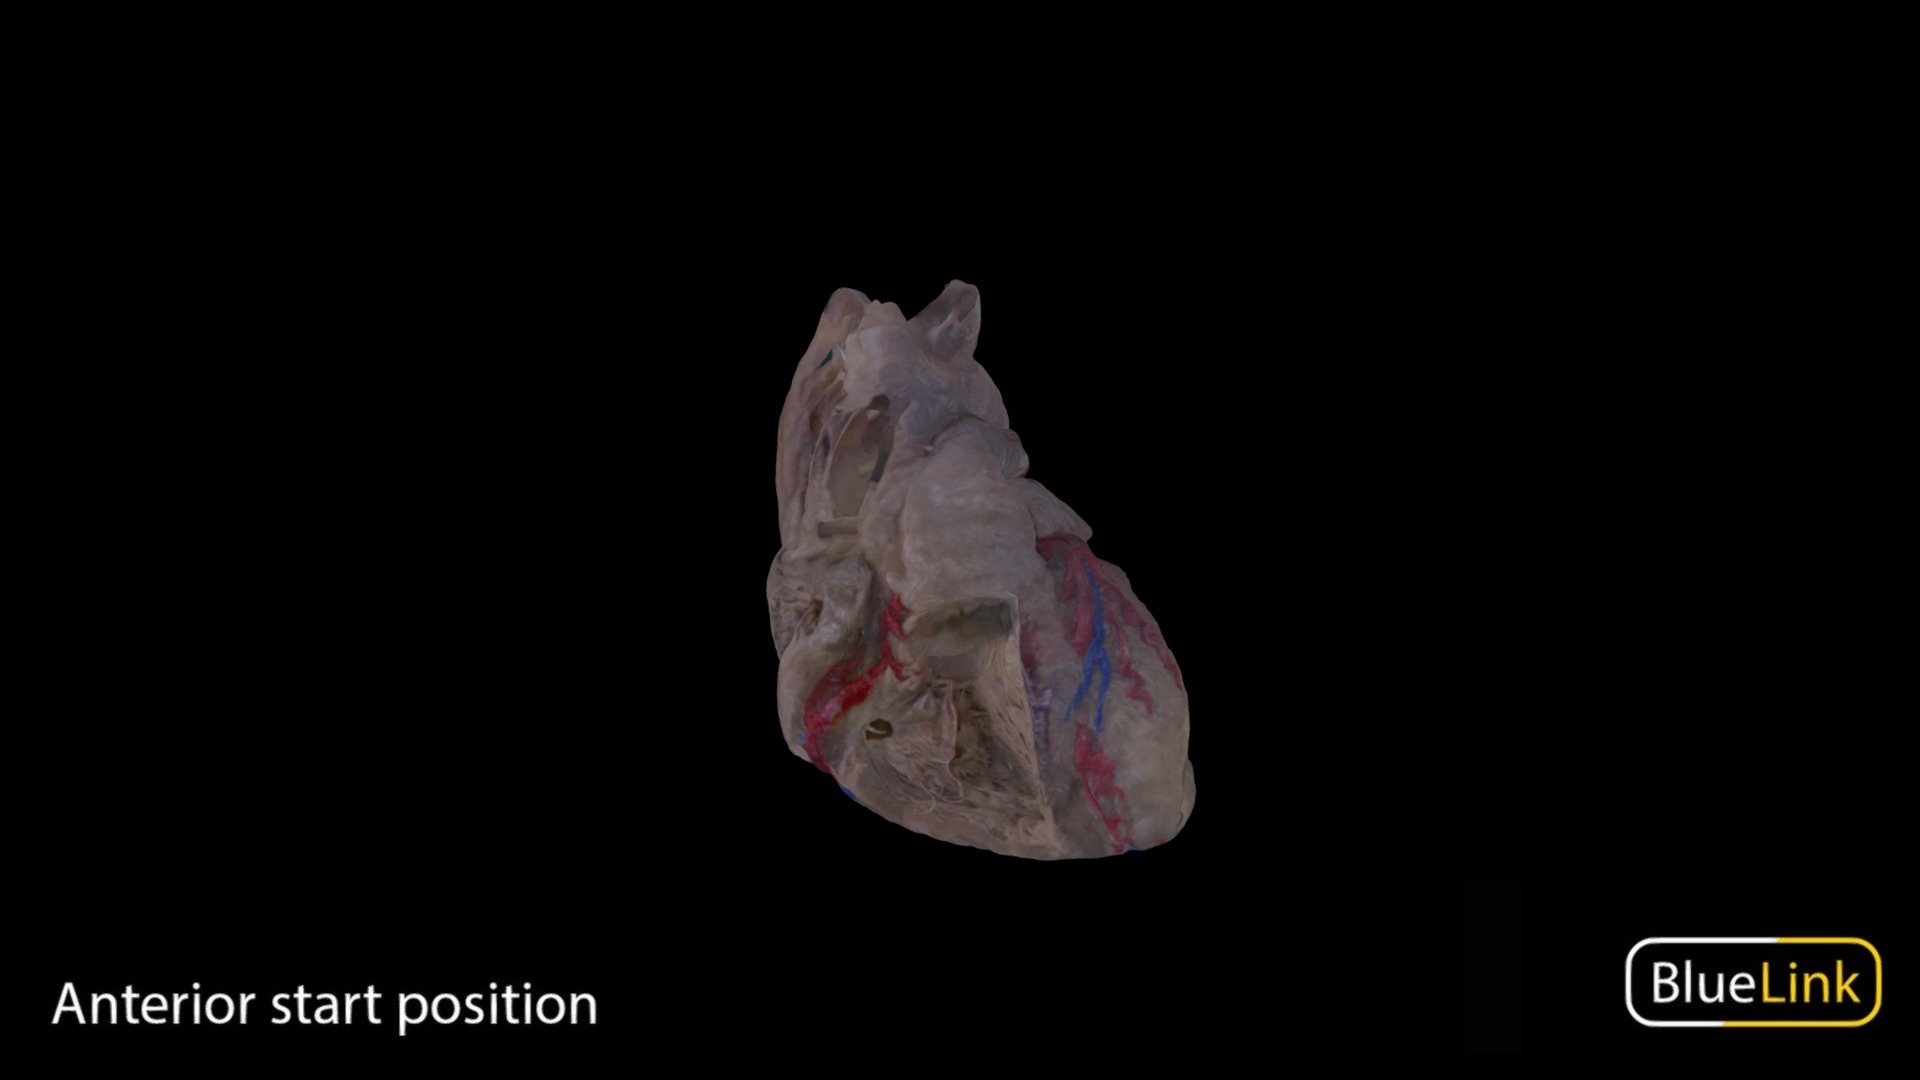 Human heart showing internal and external features
Captured with: EinScan Pro
Captured by: Will Gribbin
Edited by: Cristina Prall
University of Michigan
30279-C01 - Heart - Atria, Ventricles and Vasculature - 3D model by Bluelink Anatomy - University of Michigan (@bluelinkanatomy) 3d model